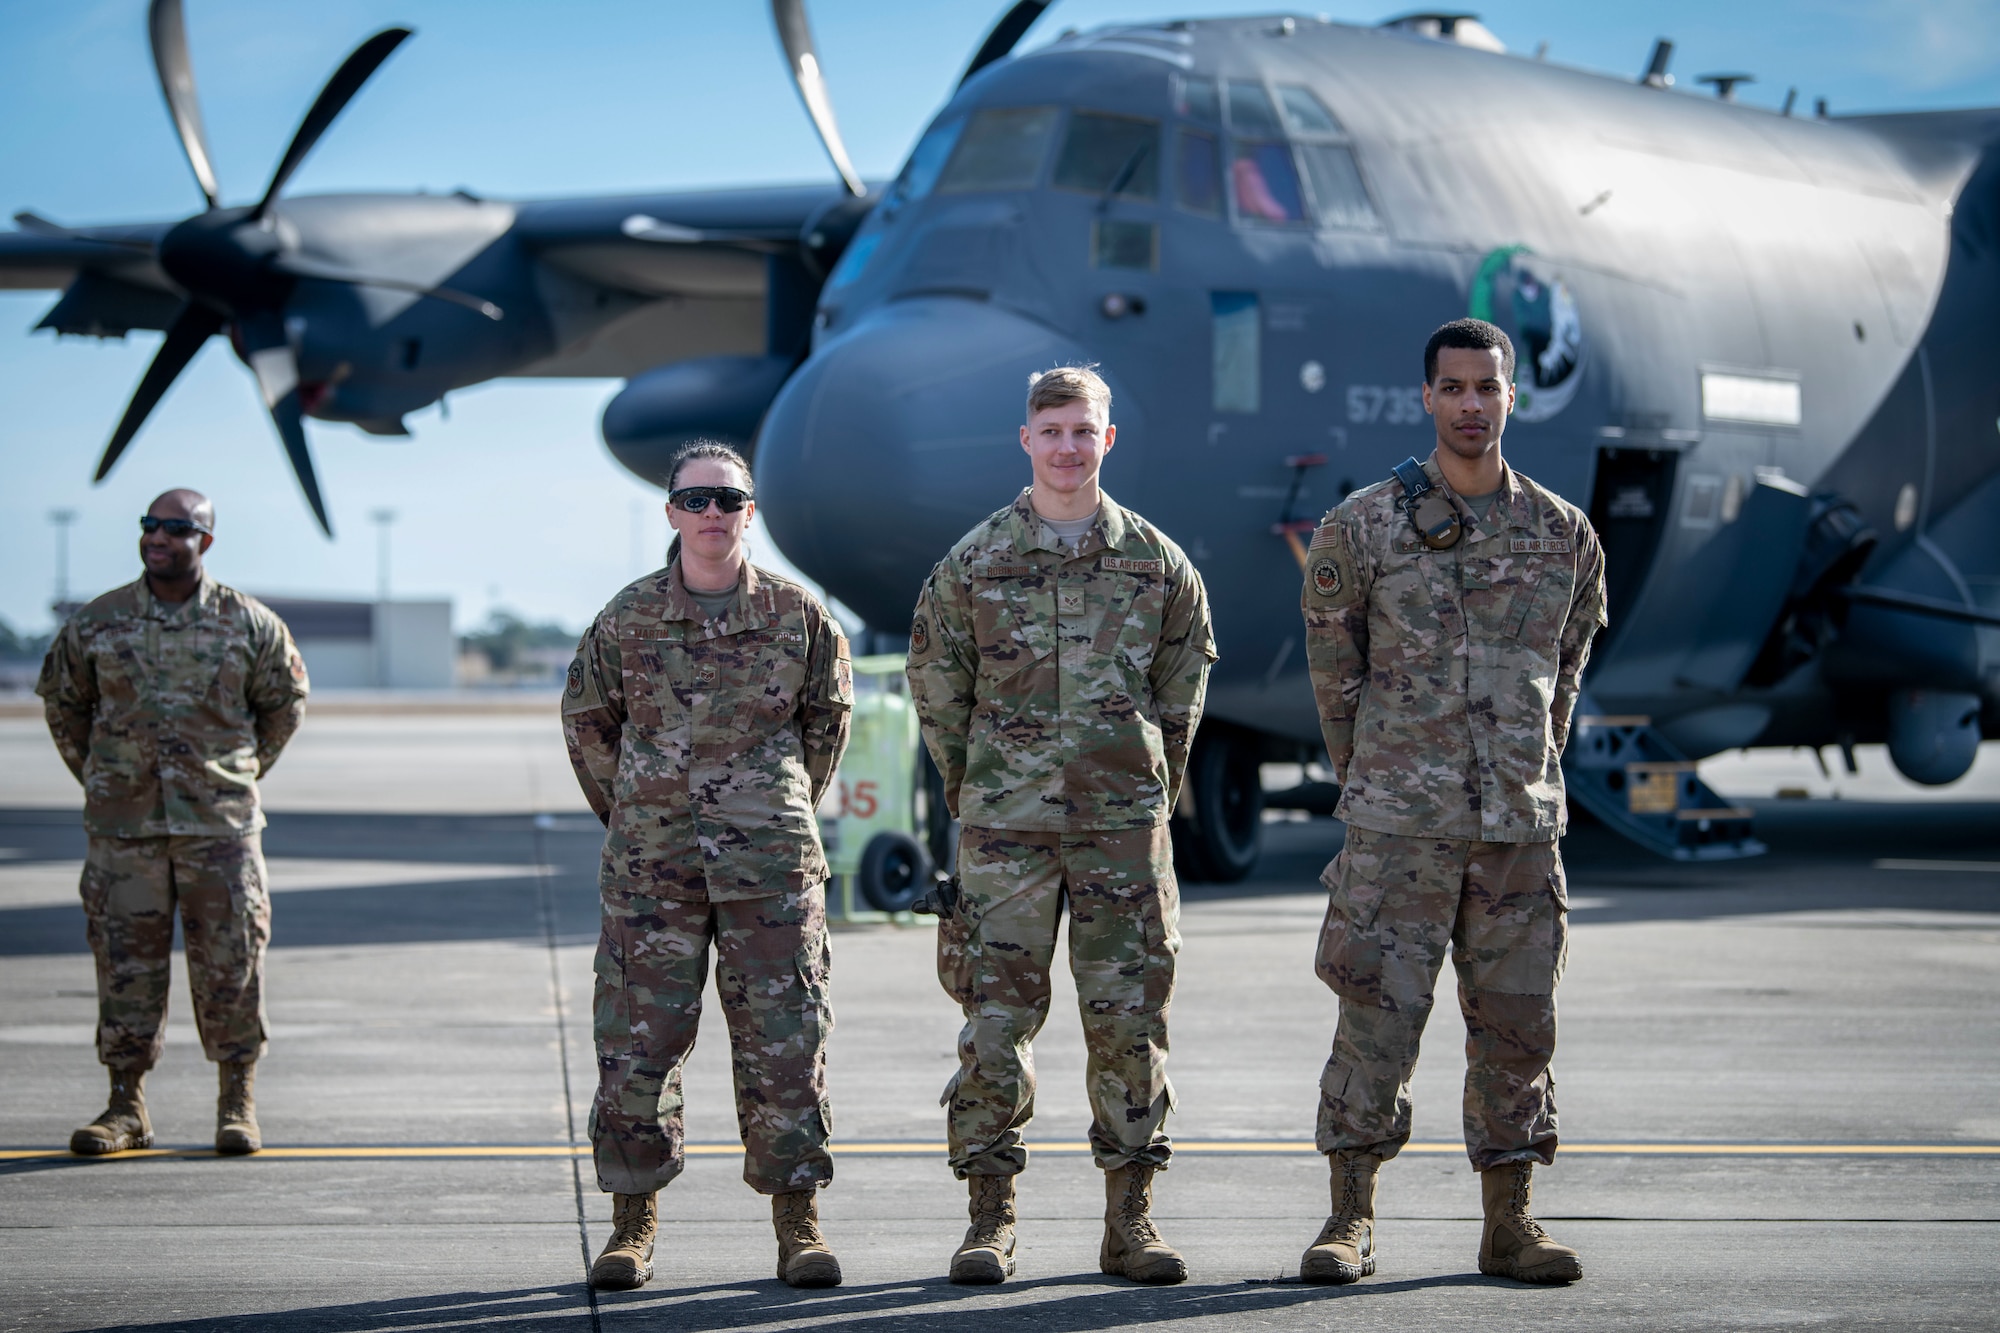 U.S. Air Force Staff Sgt. Jillian Martin, left, a 73rd Aircraft Maintenance Unit weapons load crew chief, U.S. Air Force Senior Airman David Robinson, center, and U.S. Air Force Senior Airman Adrian Bethea, right, 73rd AMU load crew members, are introduced during the 2022 Weapons Load Crew of the Year Competition, Jan. 31, 2022, at Hurlburt Field, Florida.